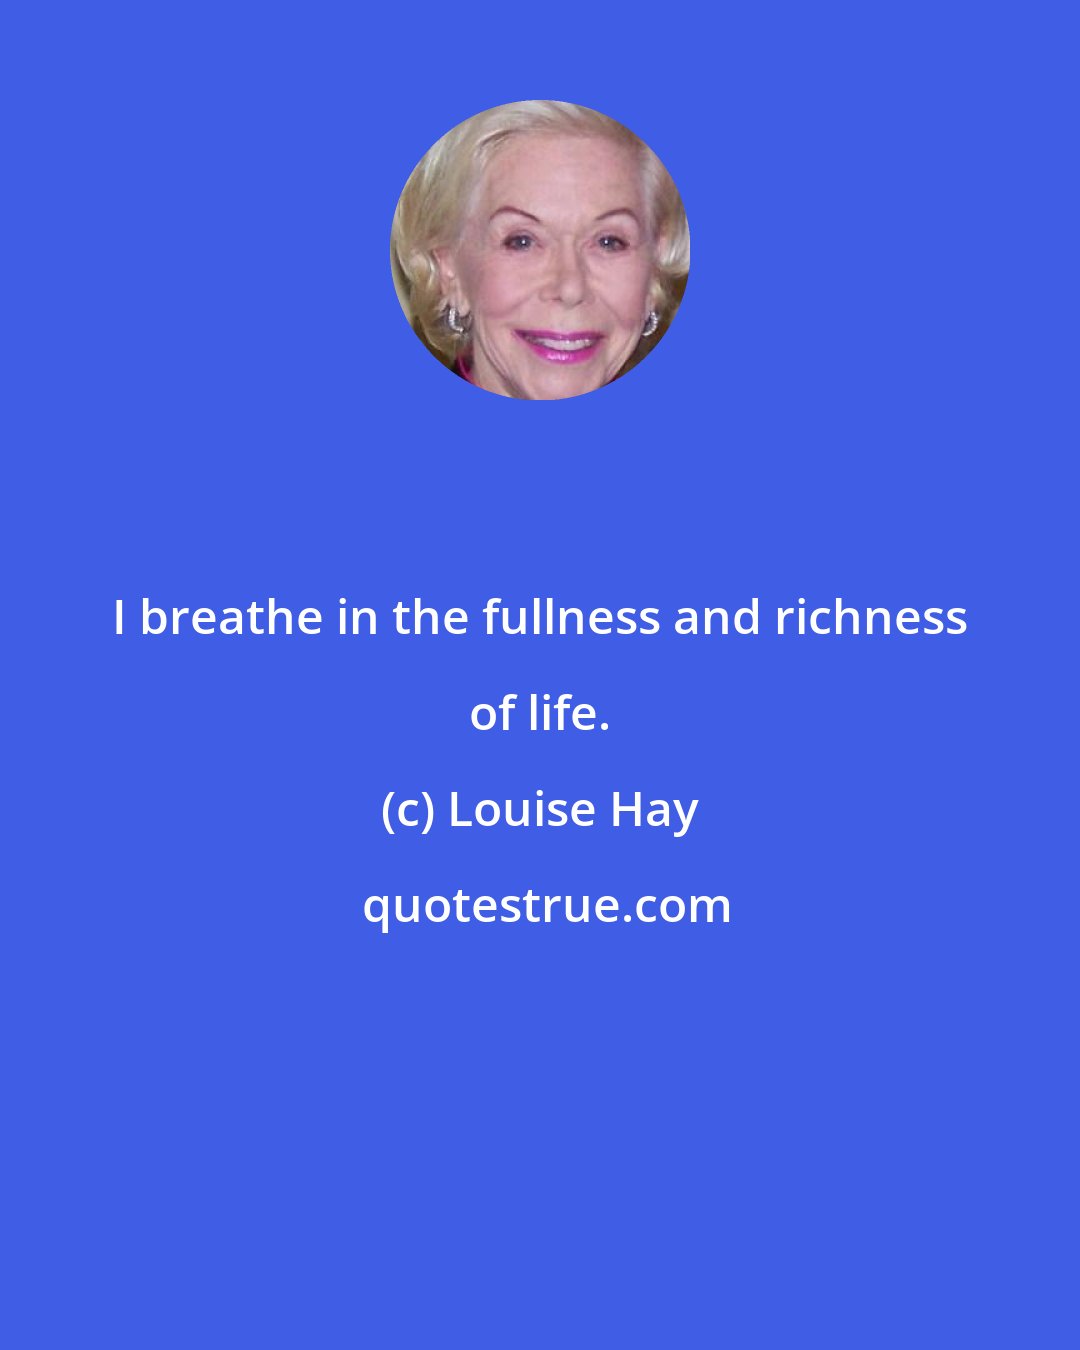 Louise Hay: I breathe in the fullness and richness of life.